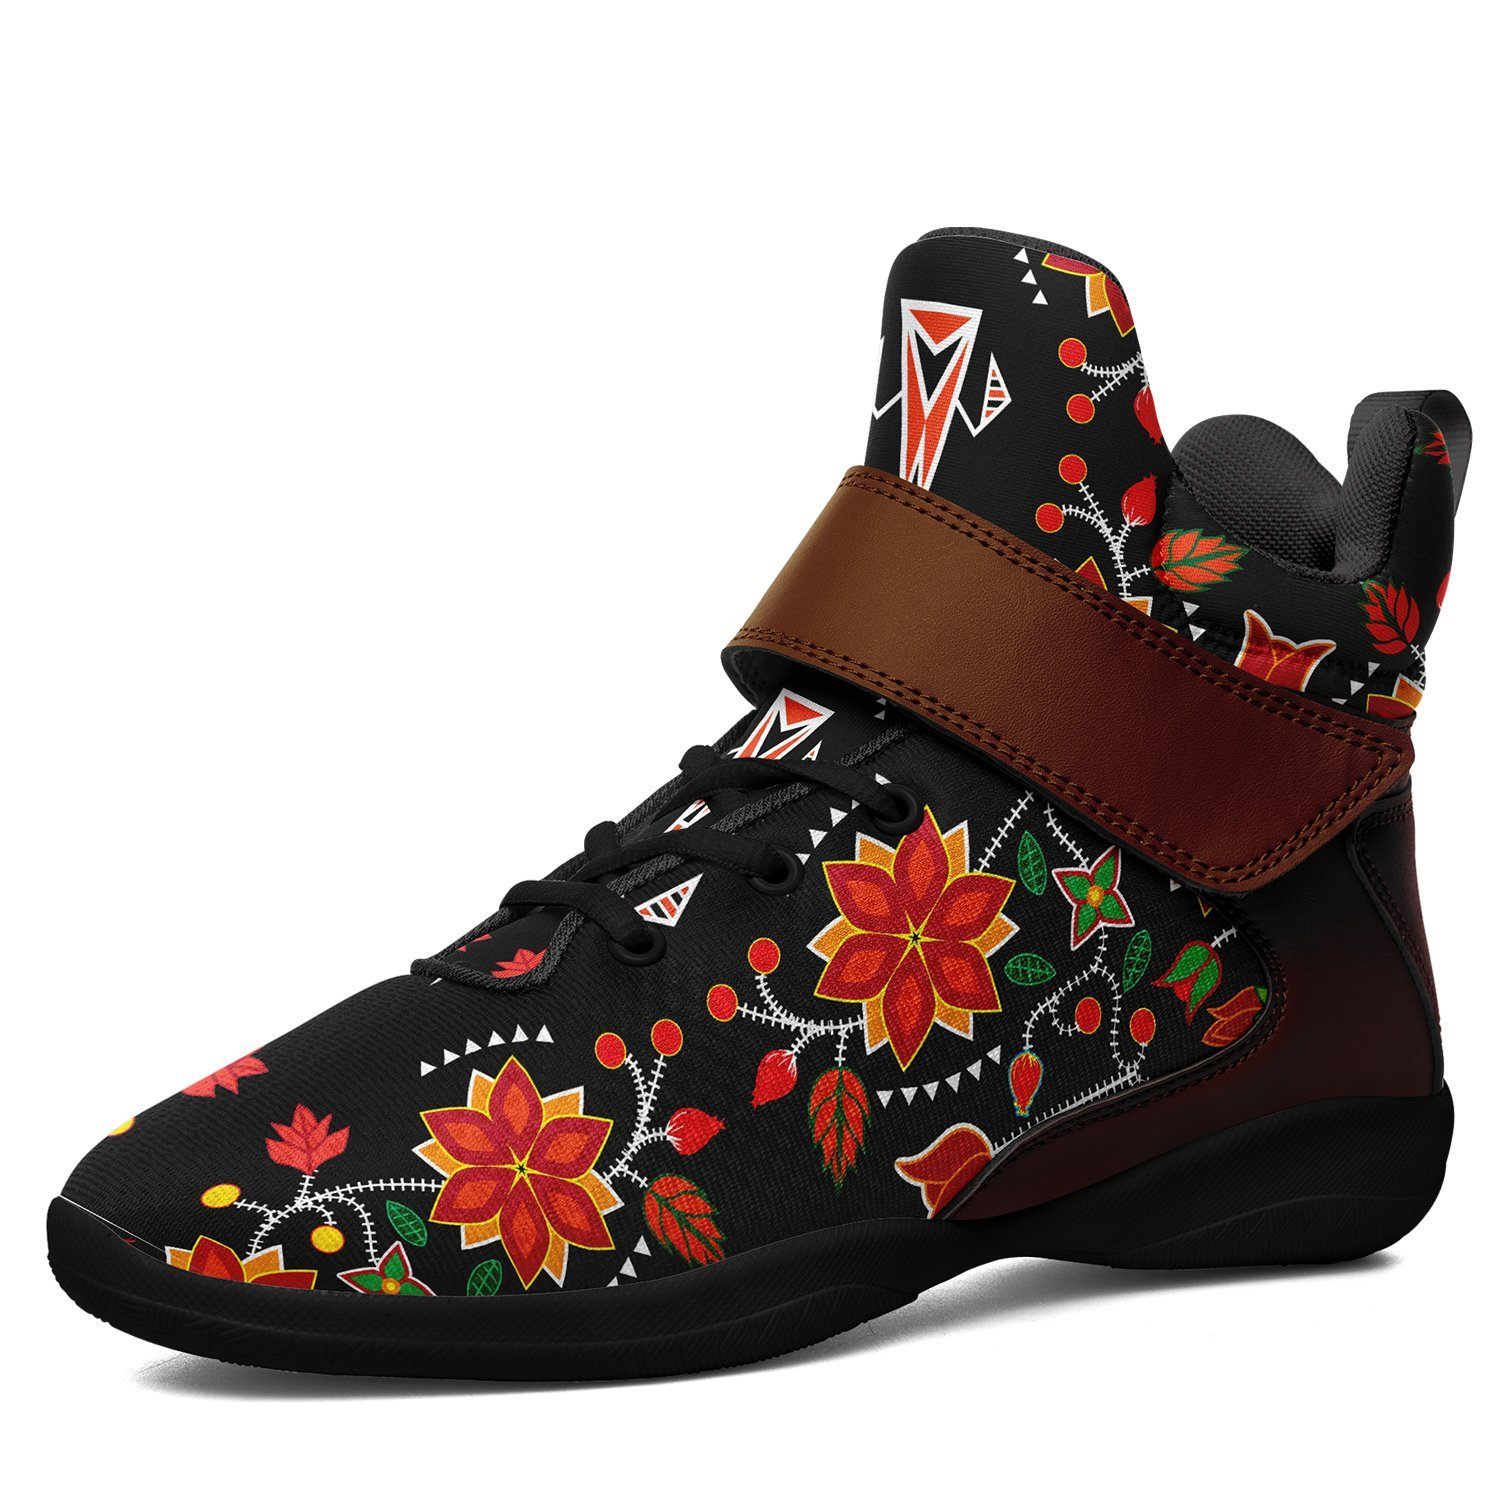 Floral Beadwork Six Bands Ipottaa Basketball / Sport High Top Shoes - Black Sole 49 Dzine US Men 7 / EUR 40 Black Sole with Brown Strap 